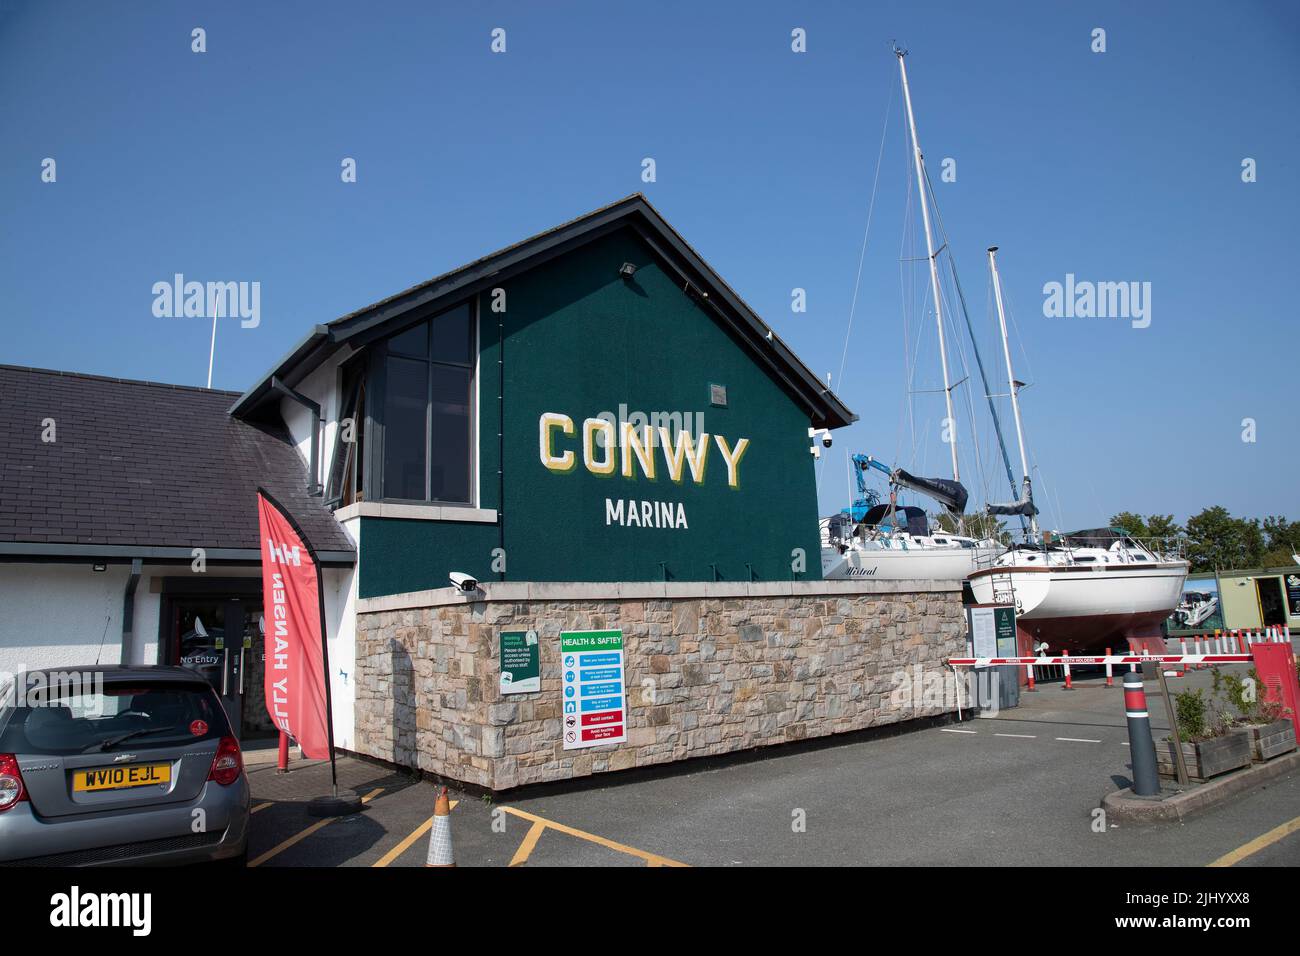 The Conwy Marina building serving the Yacht club and boating marina in Conwy, North Wales, U.K. Stock Photo